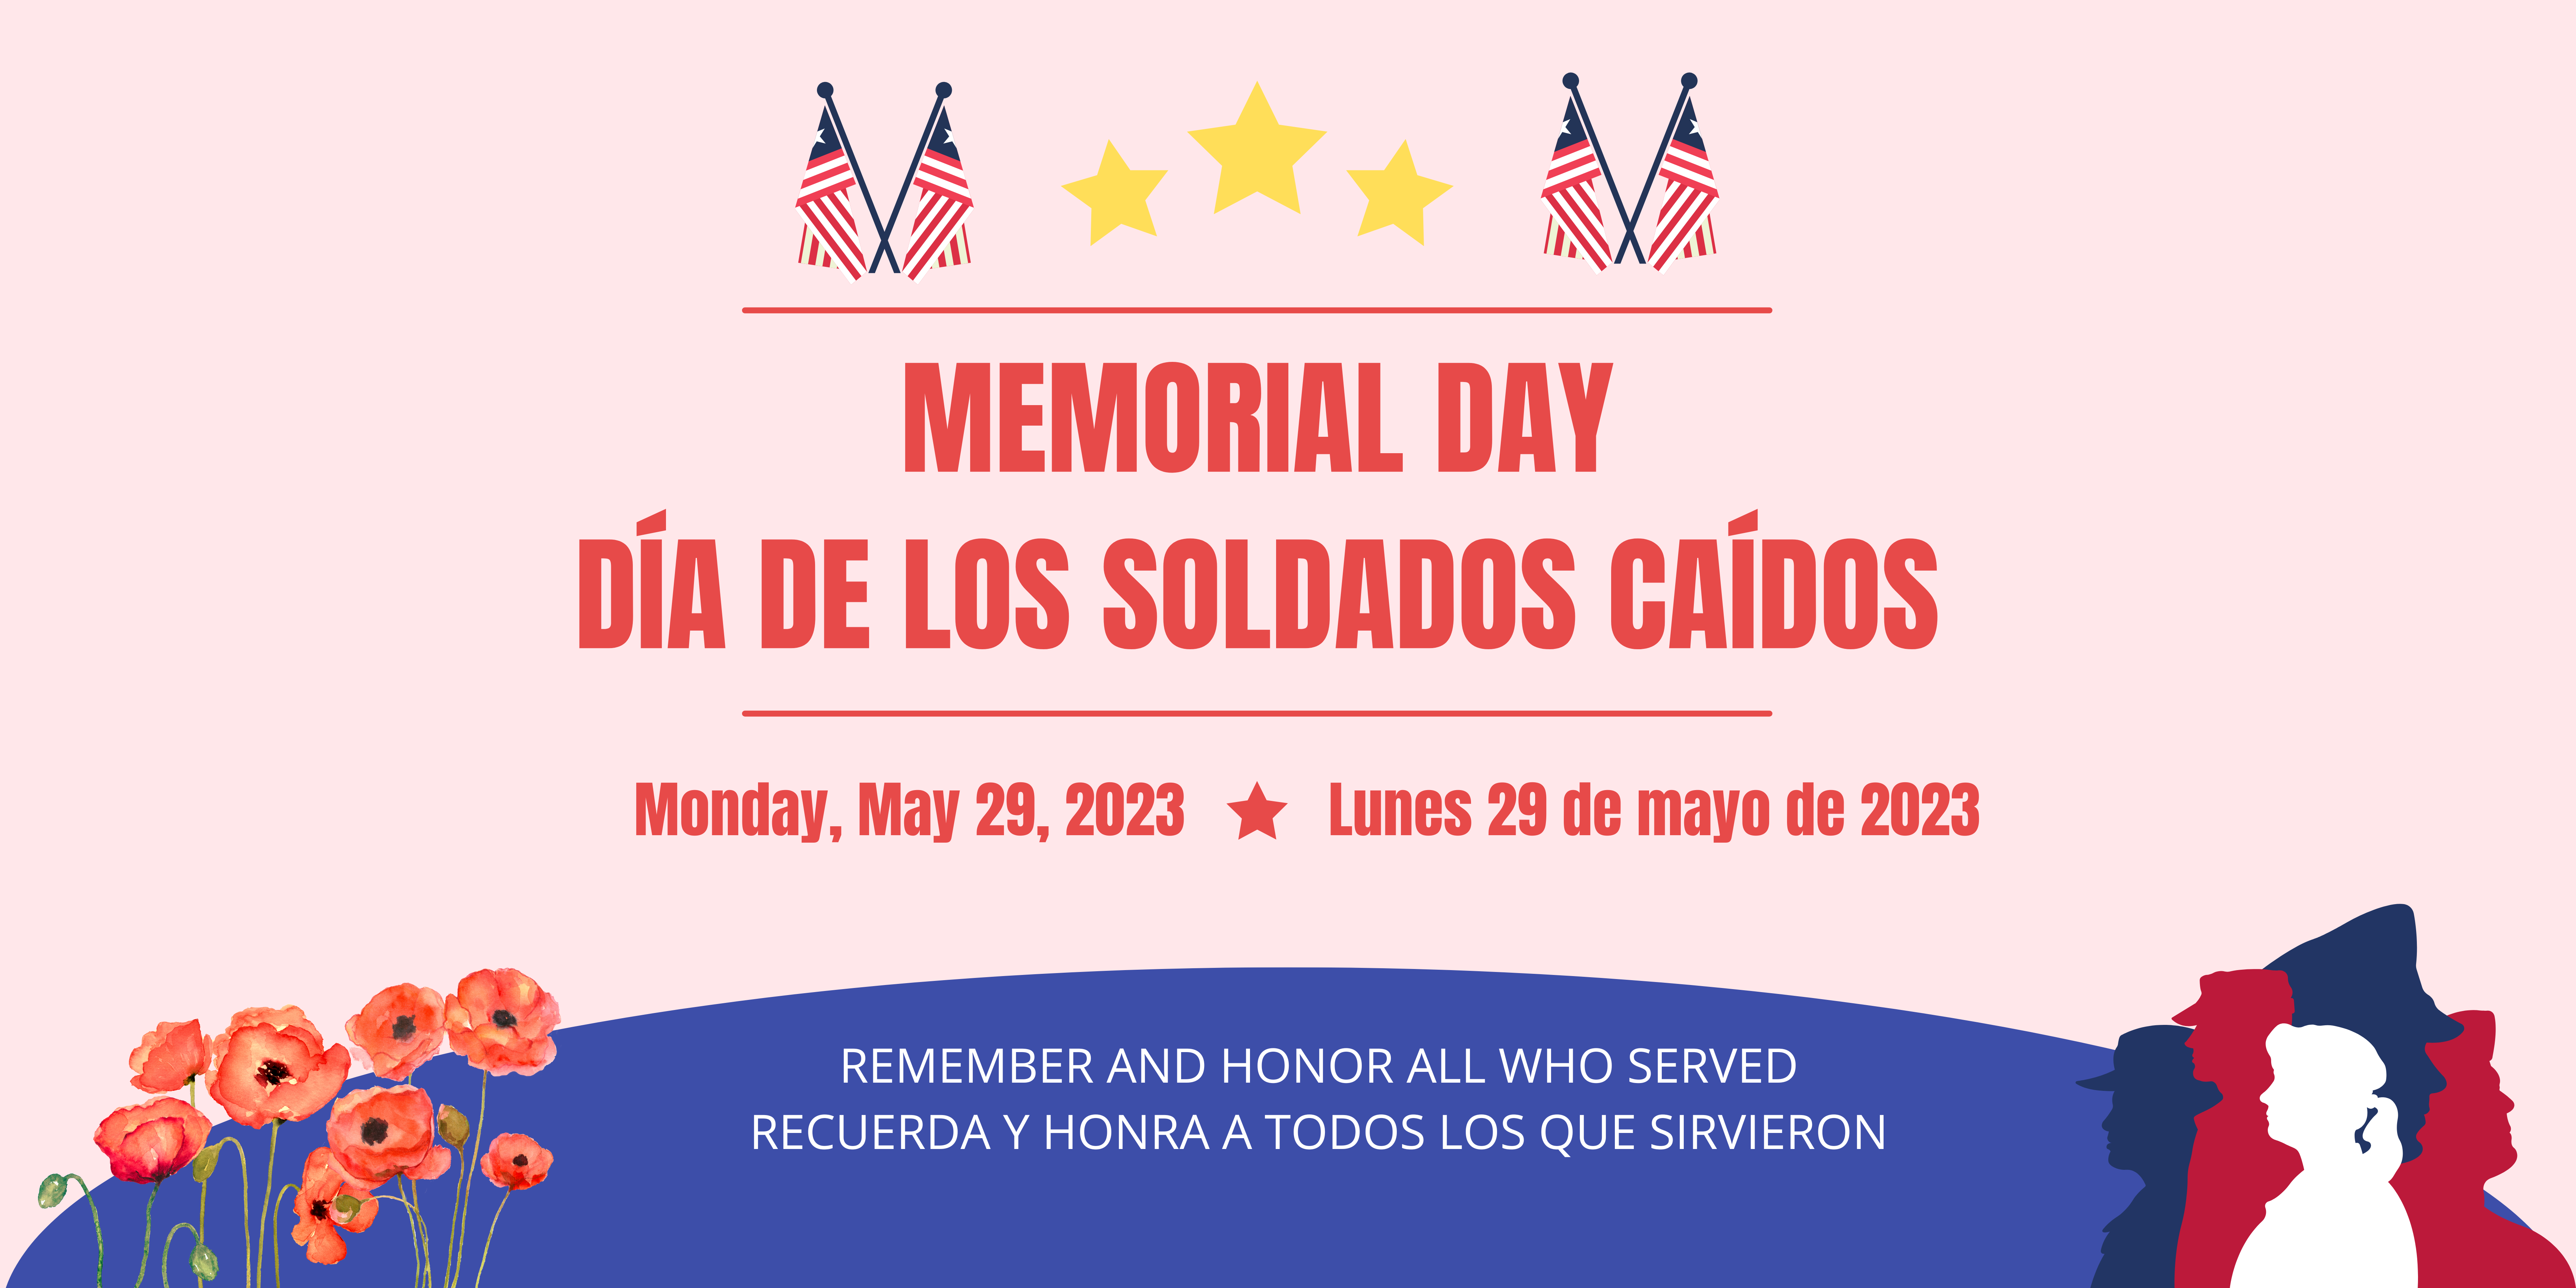 Red text on pink background with graphic of red poppies in lower left corner and a silhouette of 5 service members in bottom right corner. Text says, "Memorial Day, Monday, May 29, 2023, Remember and Honor All Who Served."